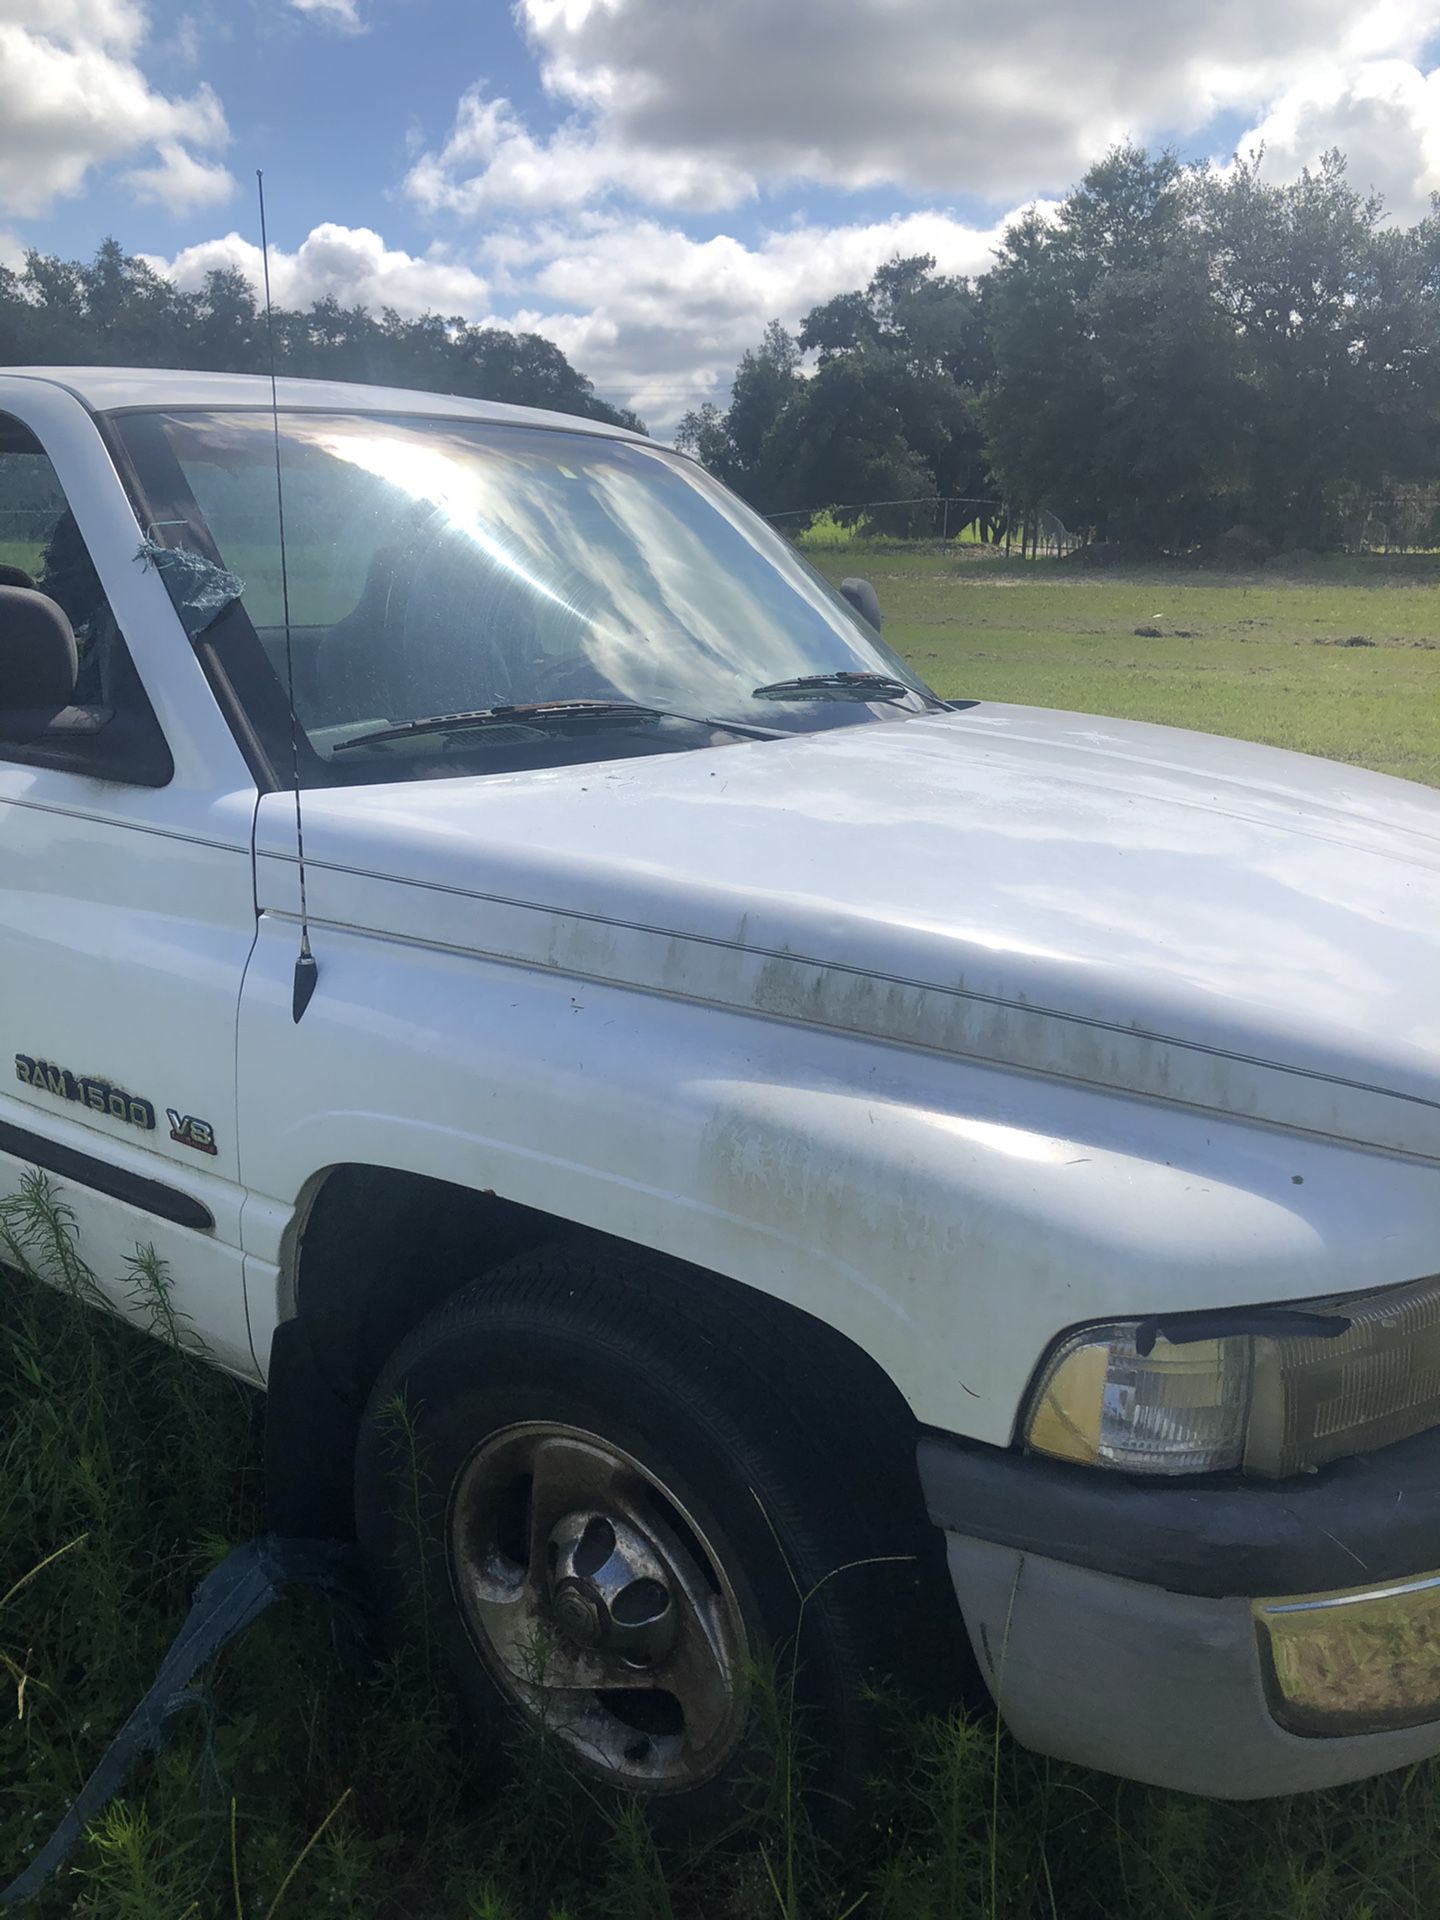 1998 dodge 1500 with 140K miles. Tune up, new front end and breaks. Good work truck but needs battery and radiator. Tires have 35 percent tread. Loca